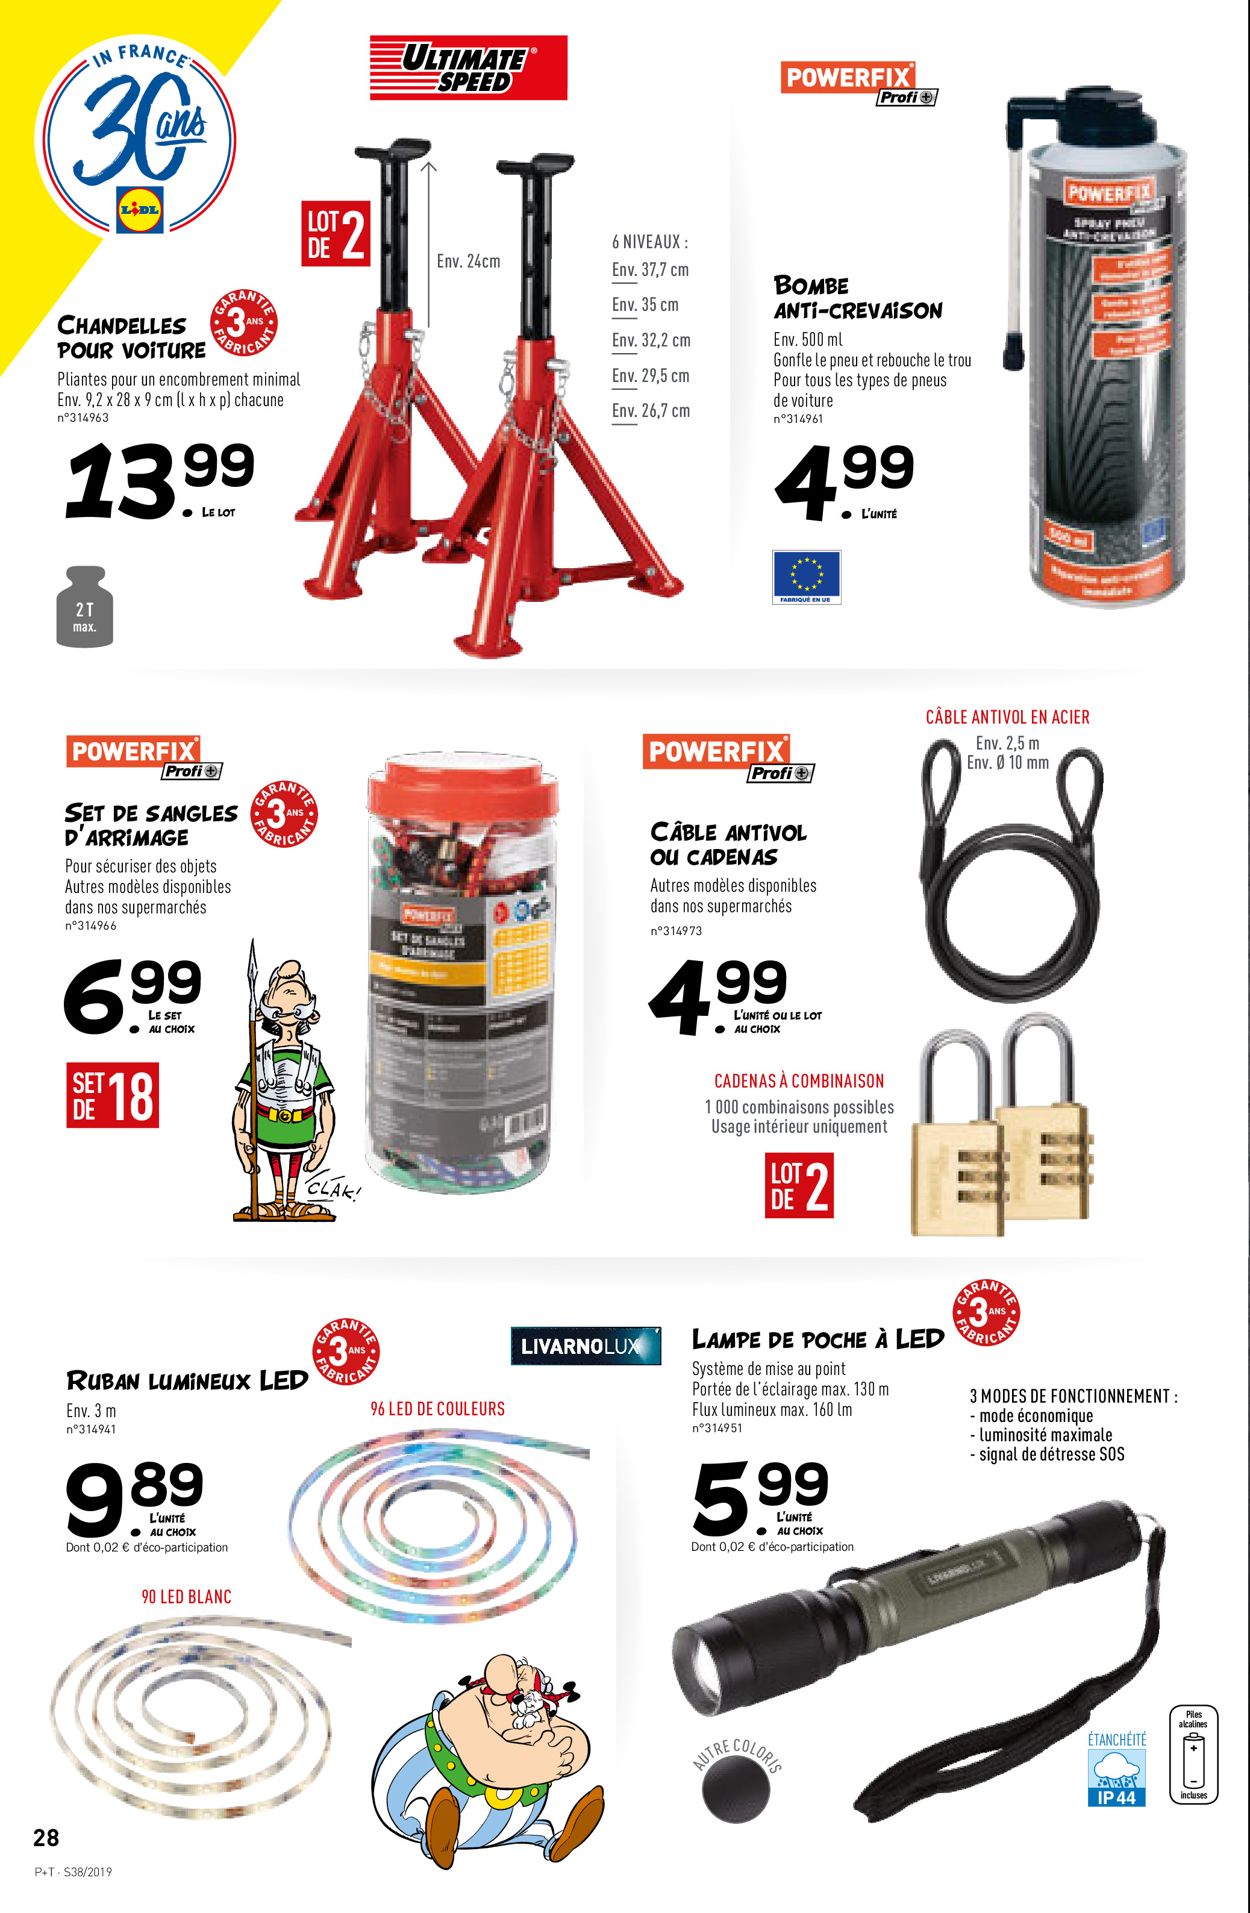 Lidl Catalogue - 18.09-24.09.2019 (Page 28)